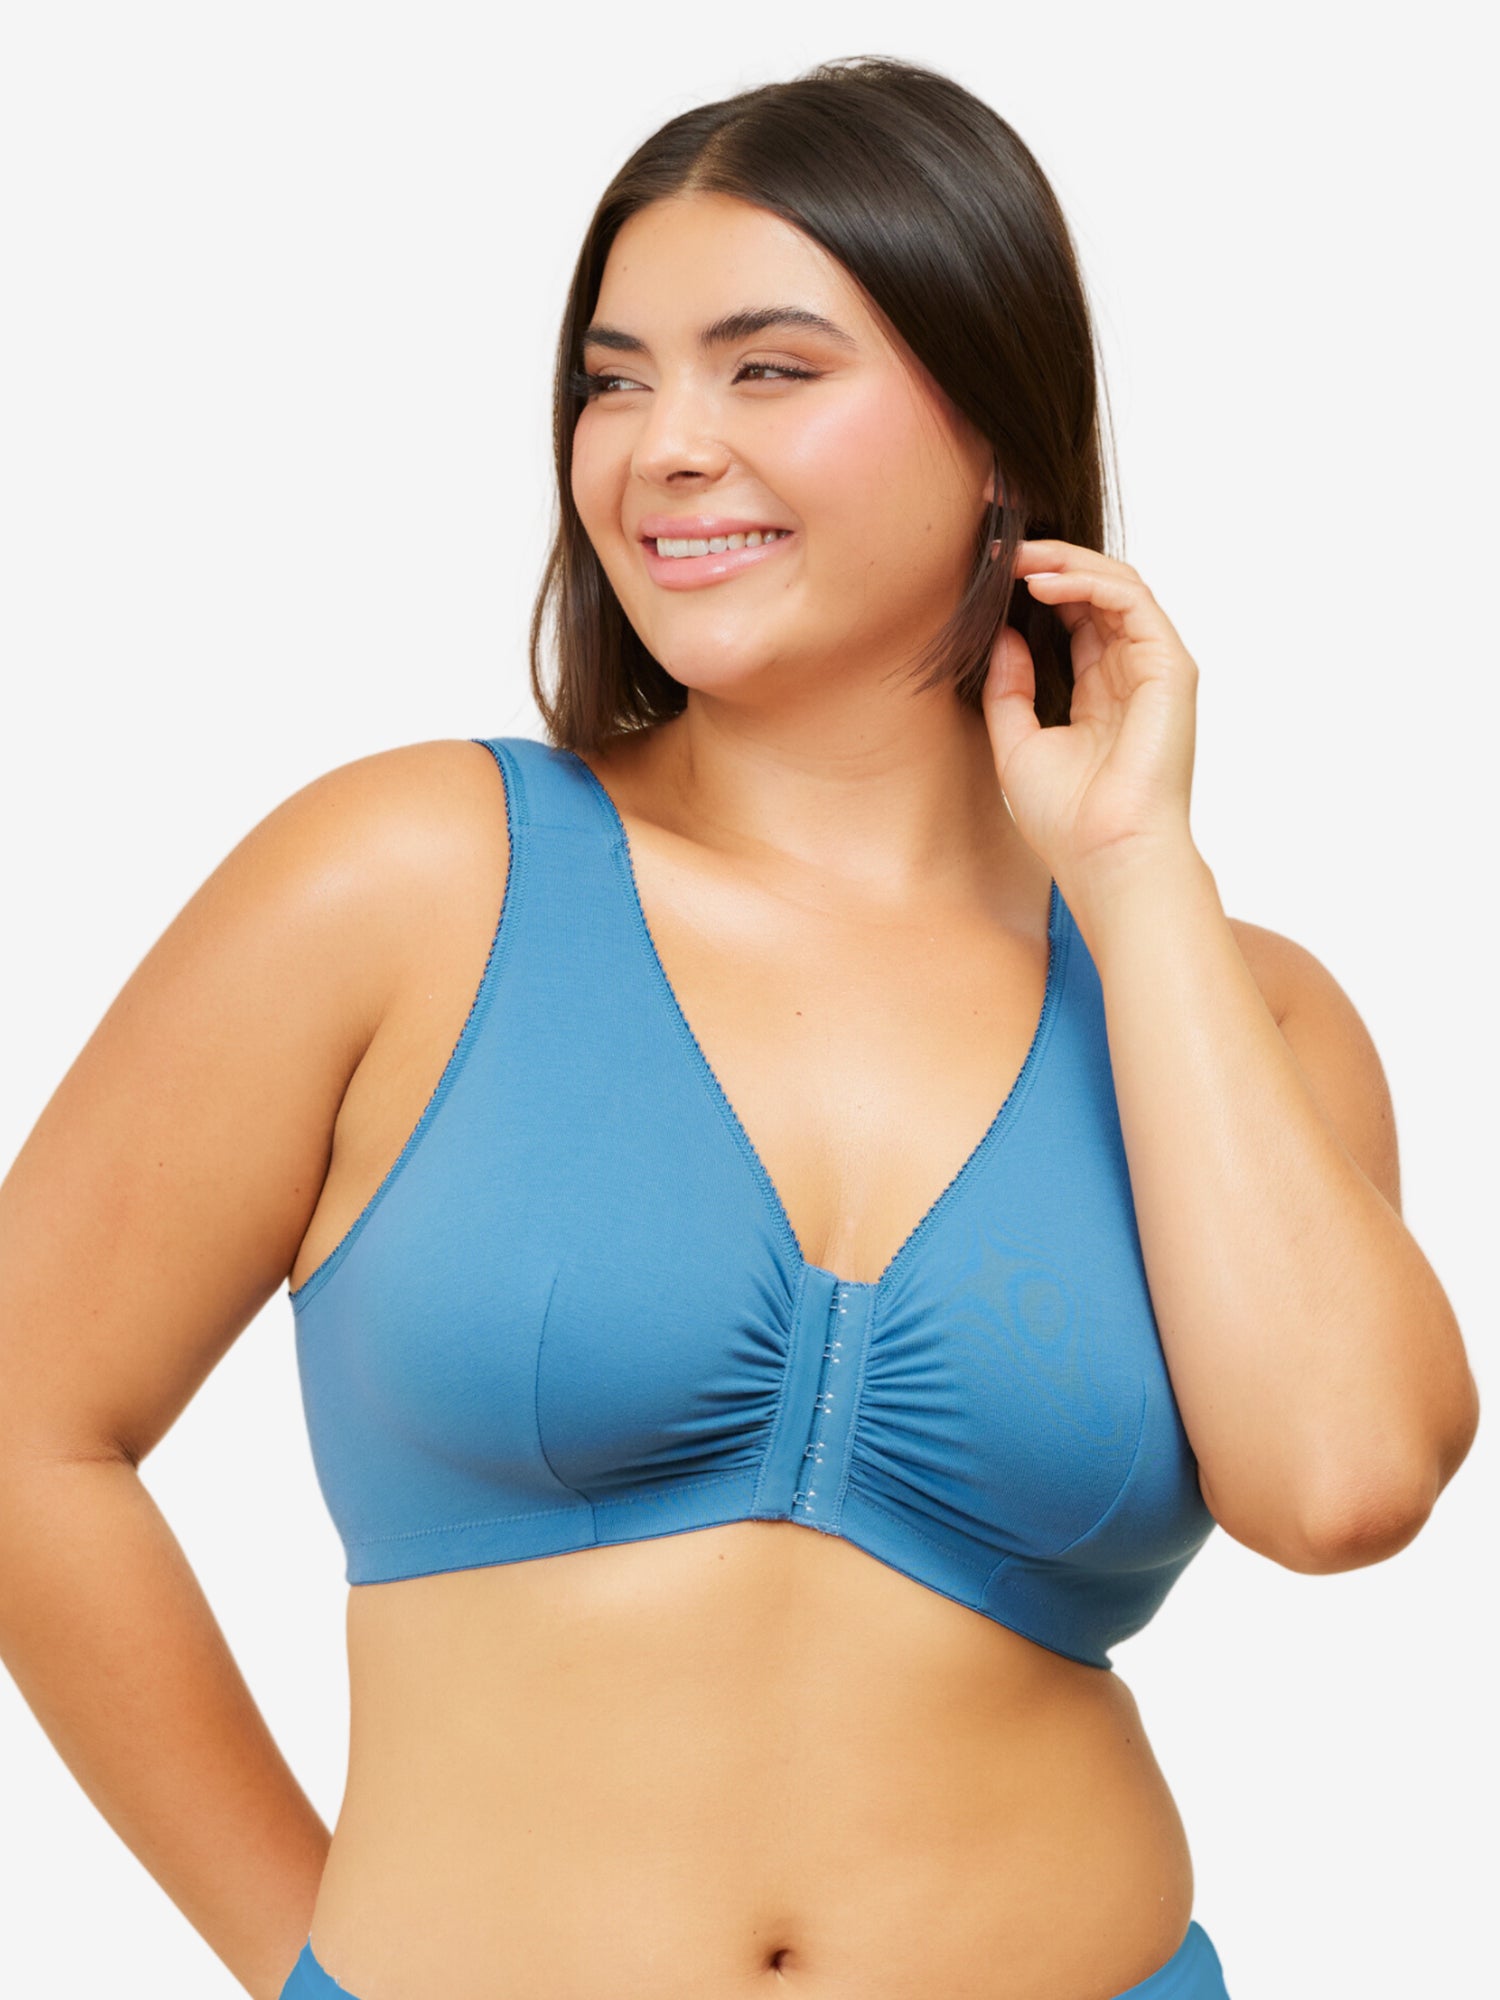 Full Coverage Bras - Elegant And Supportive Bras